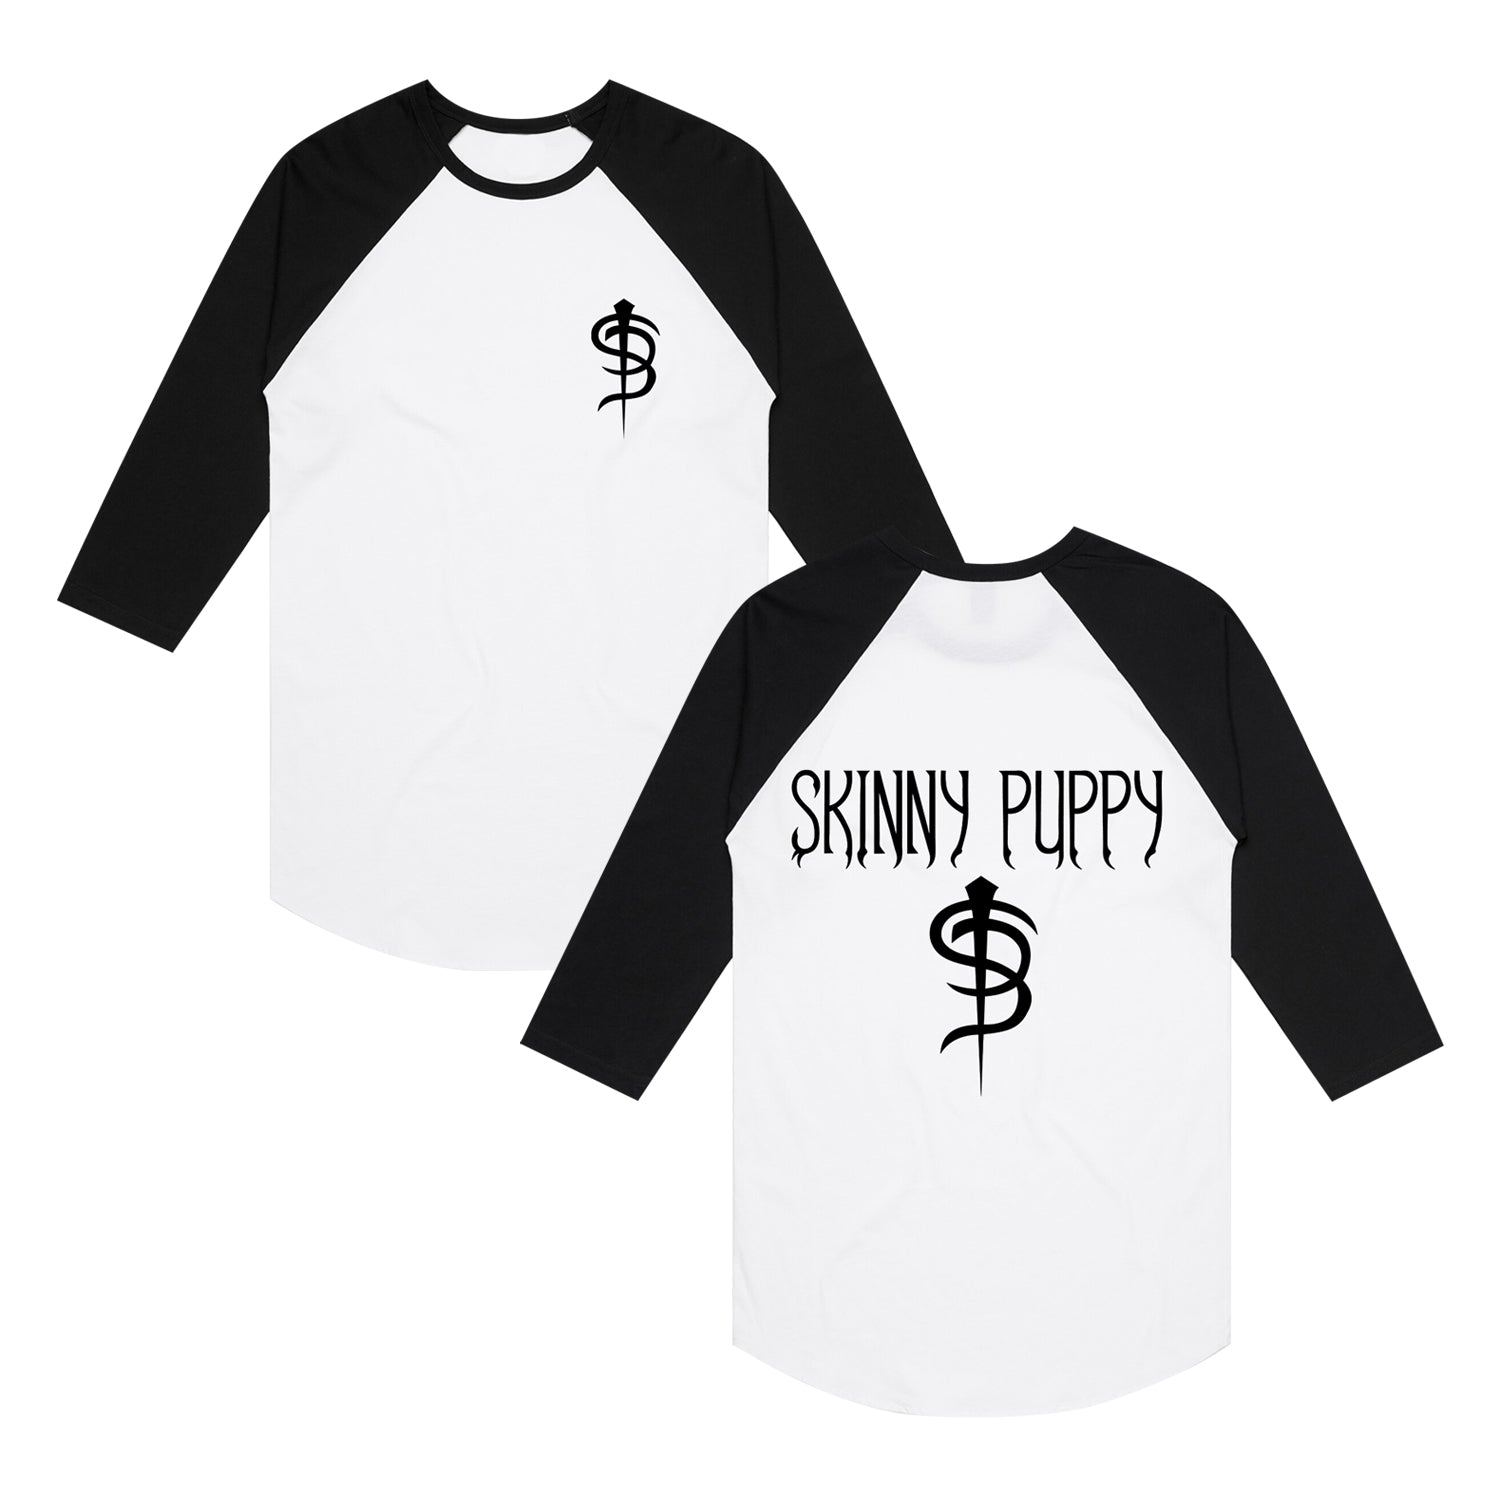 Image of the front and back of a white raglan shirt with black sleeves and collar on a white background. The front of the shirt has the black s p logo on the left chest. The back of the shirt says Skinny puppy with the s p logo below the words skinny puppy. The design on the back is also in black.